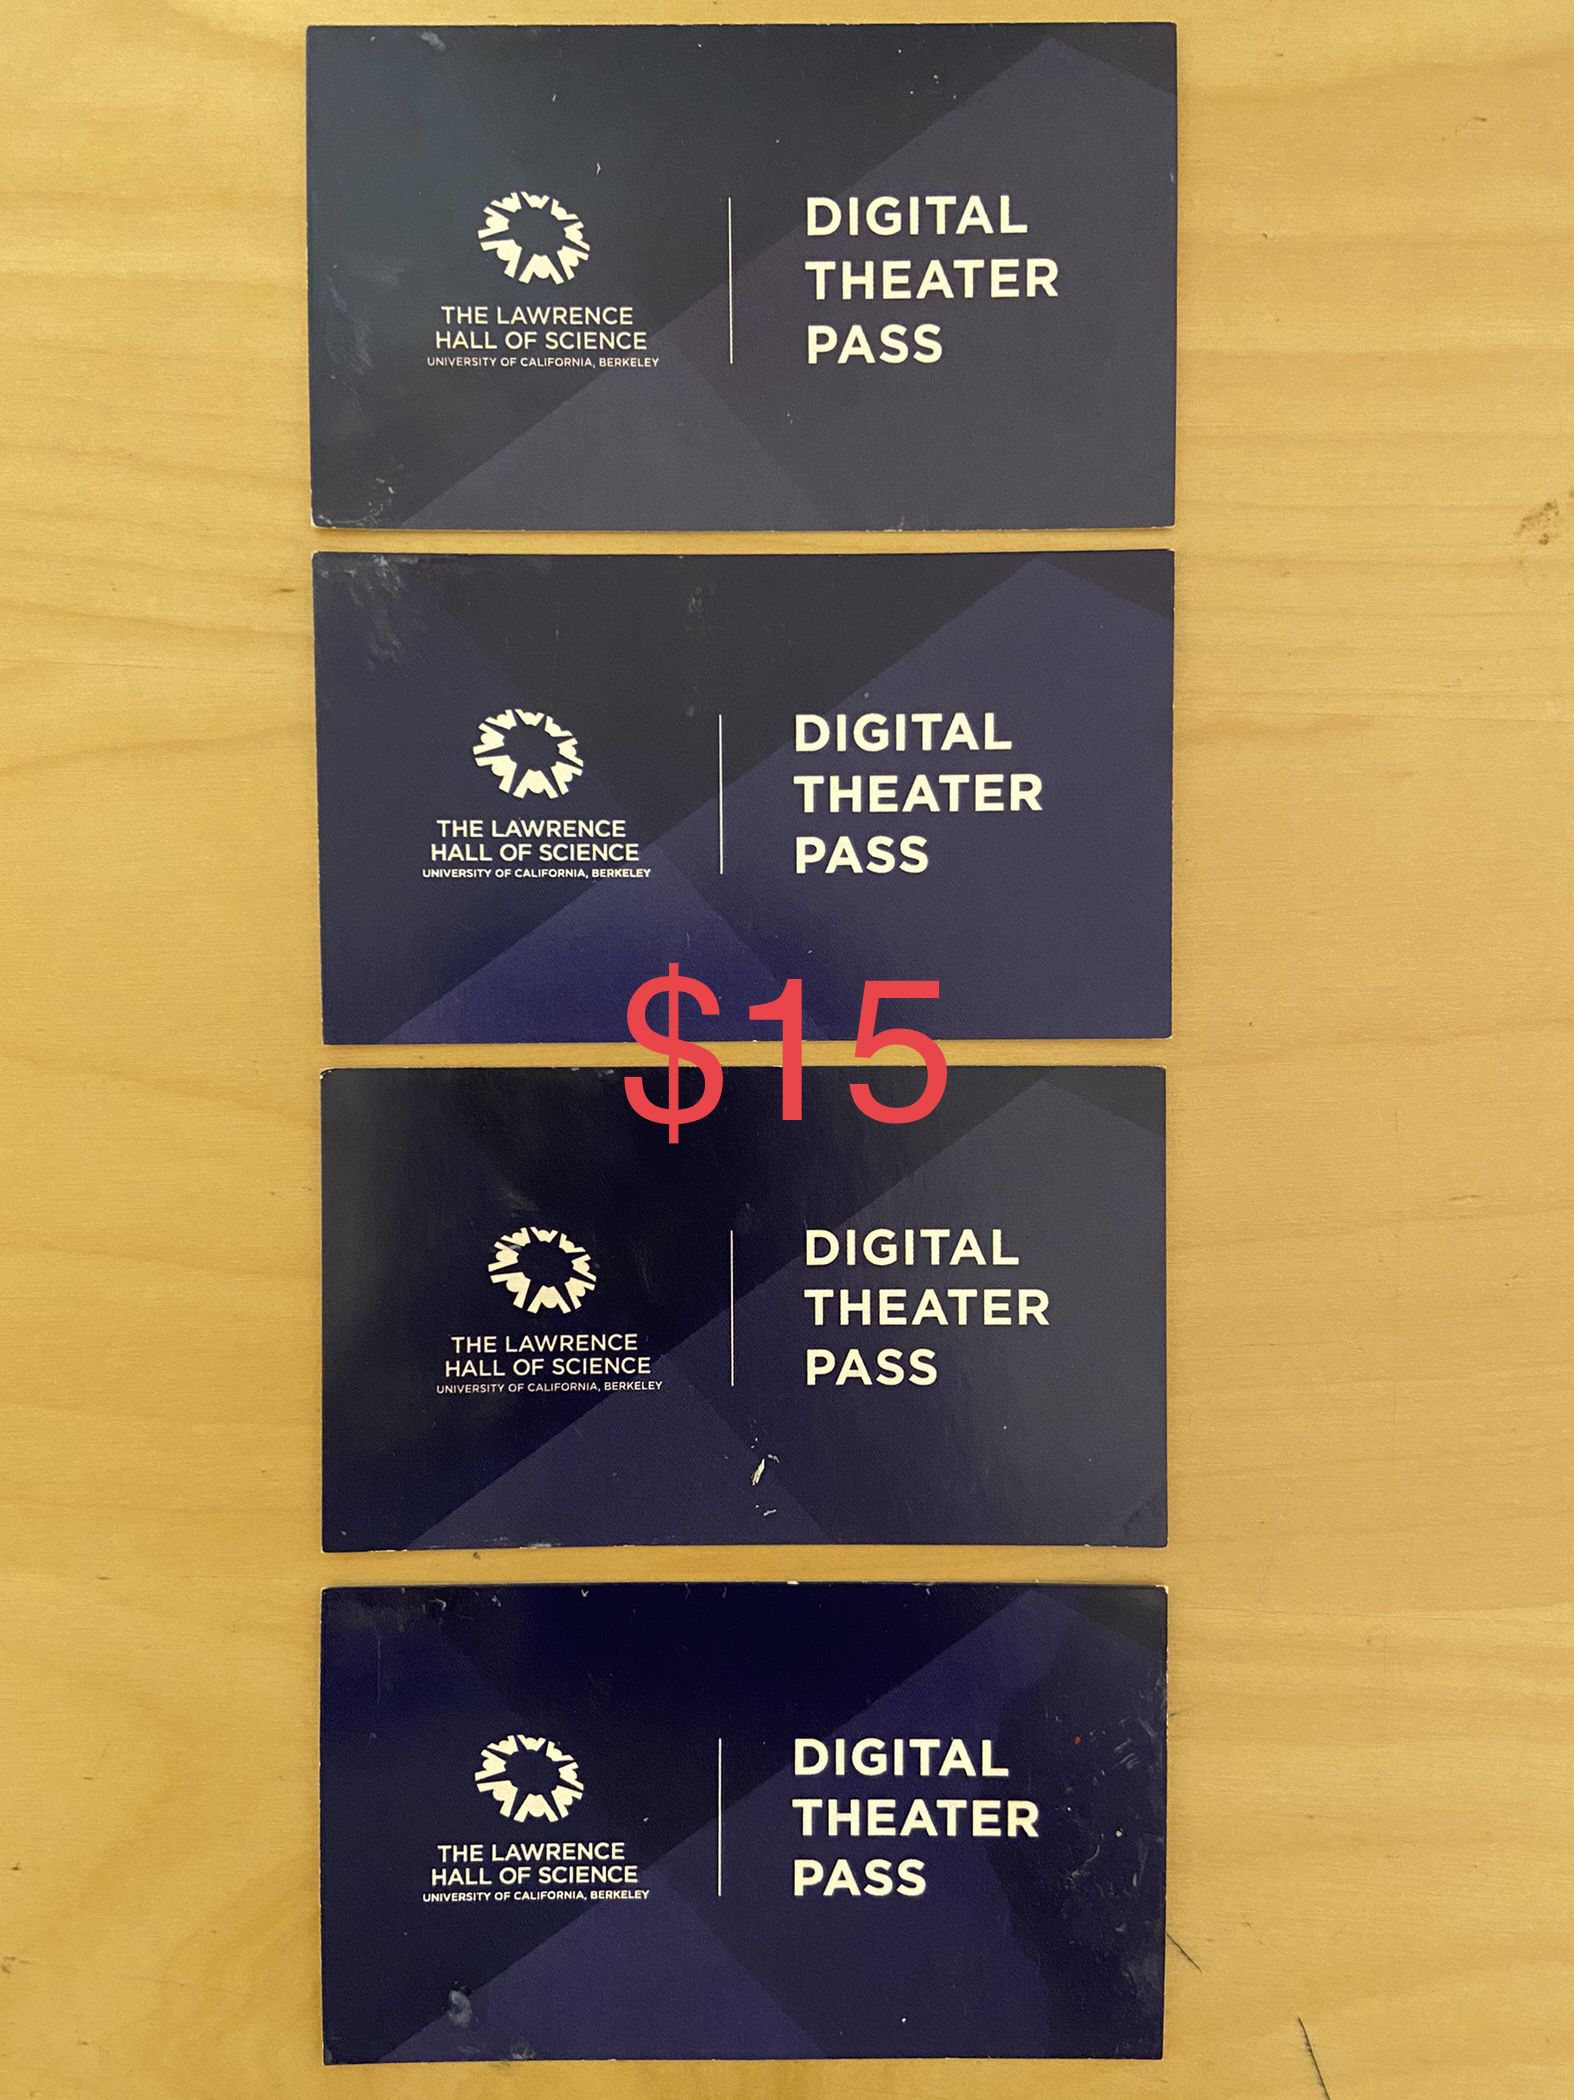 New,THE LAWRENCE HALL OF SCIENCE DIGITAL THEATER PASS tickets $15